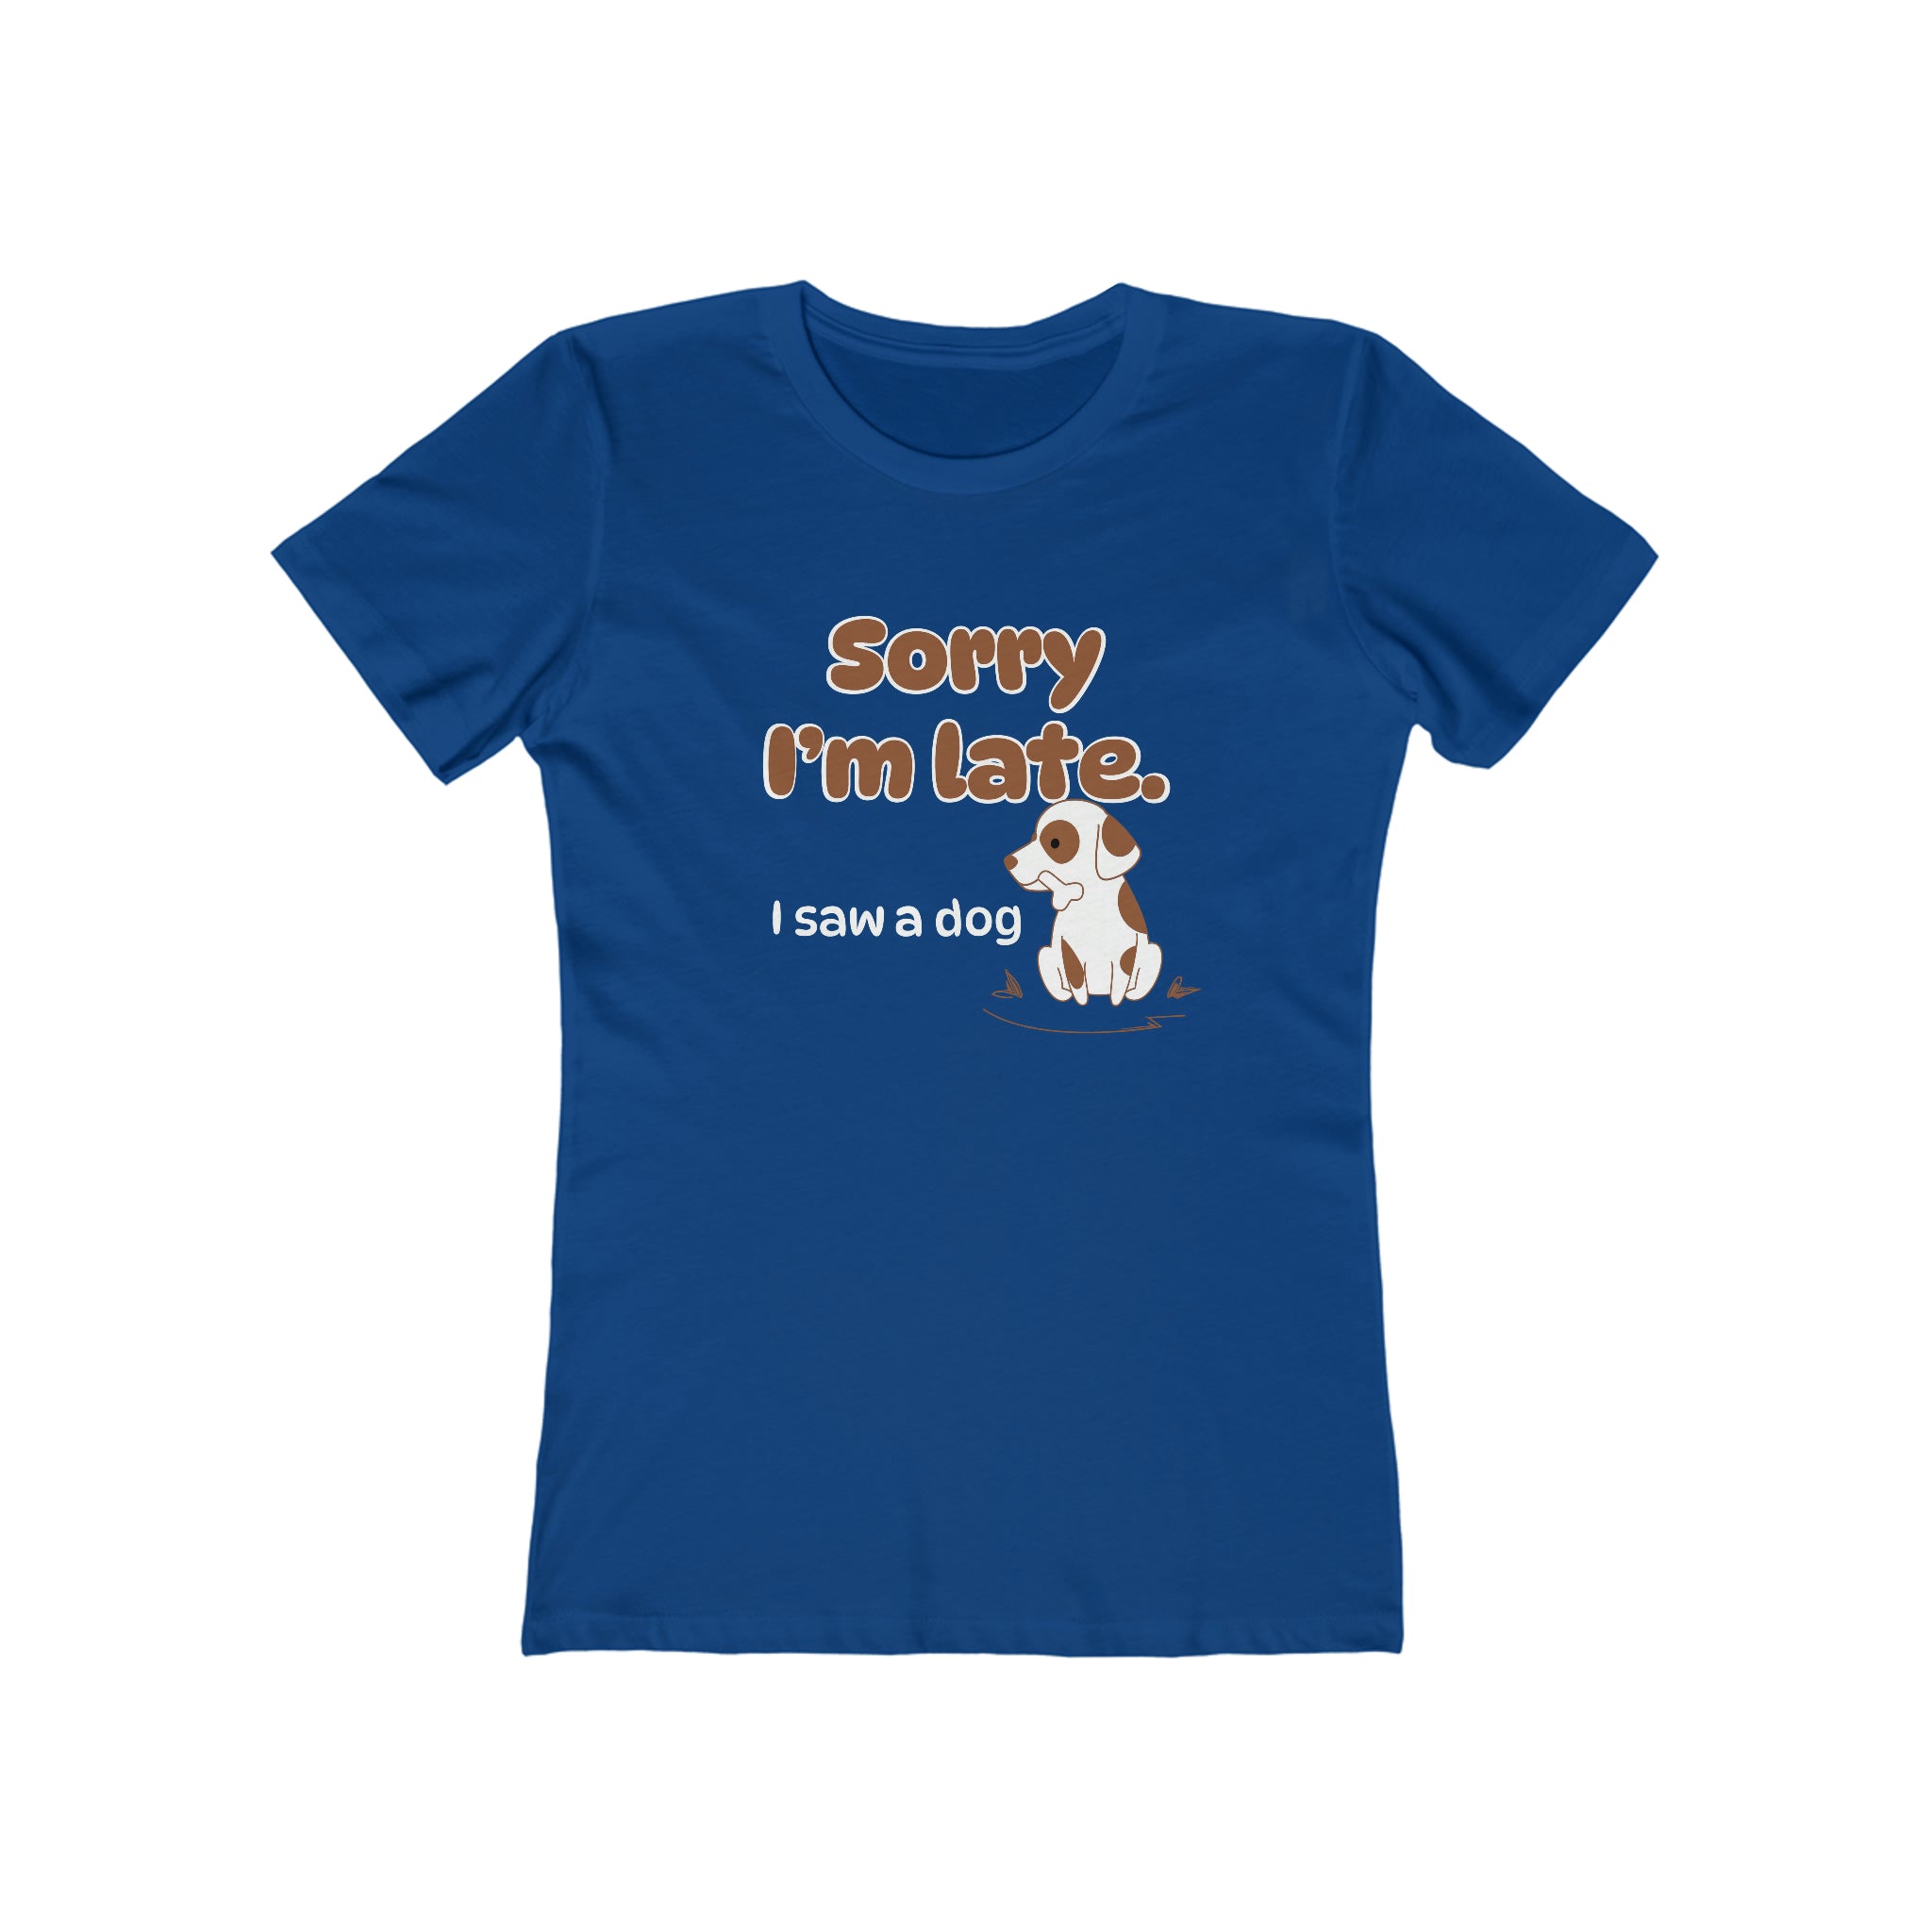 Sorry I'm late - I Saw a Dog : Women's Cotton T-Shirt by Bella+Canvas